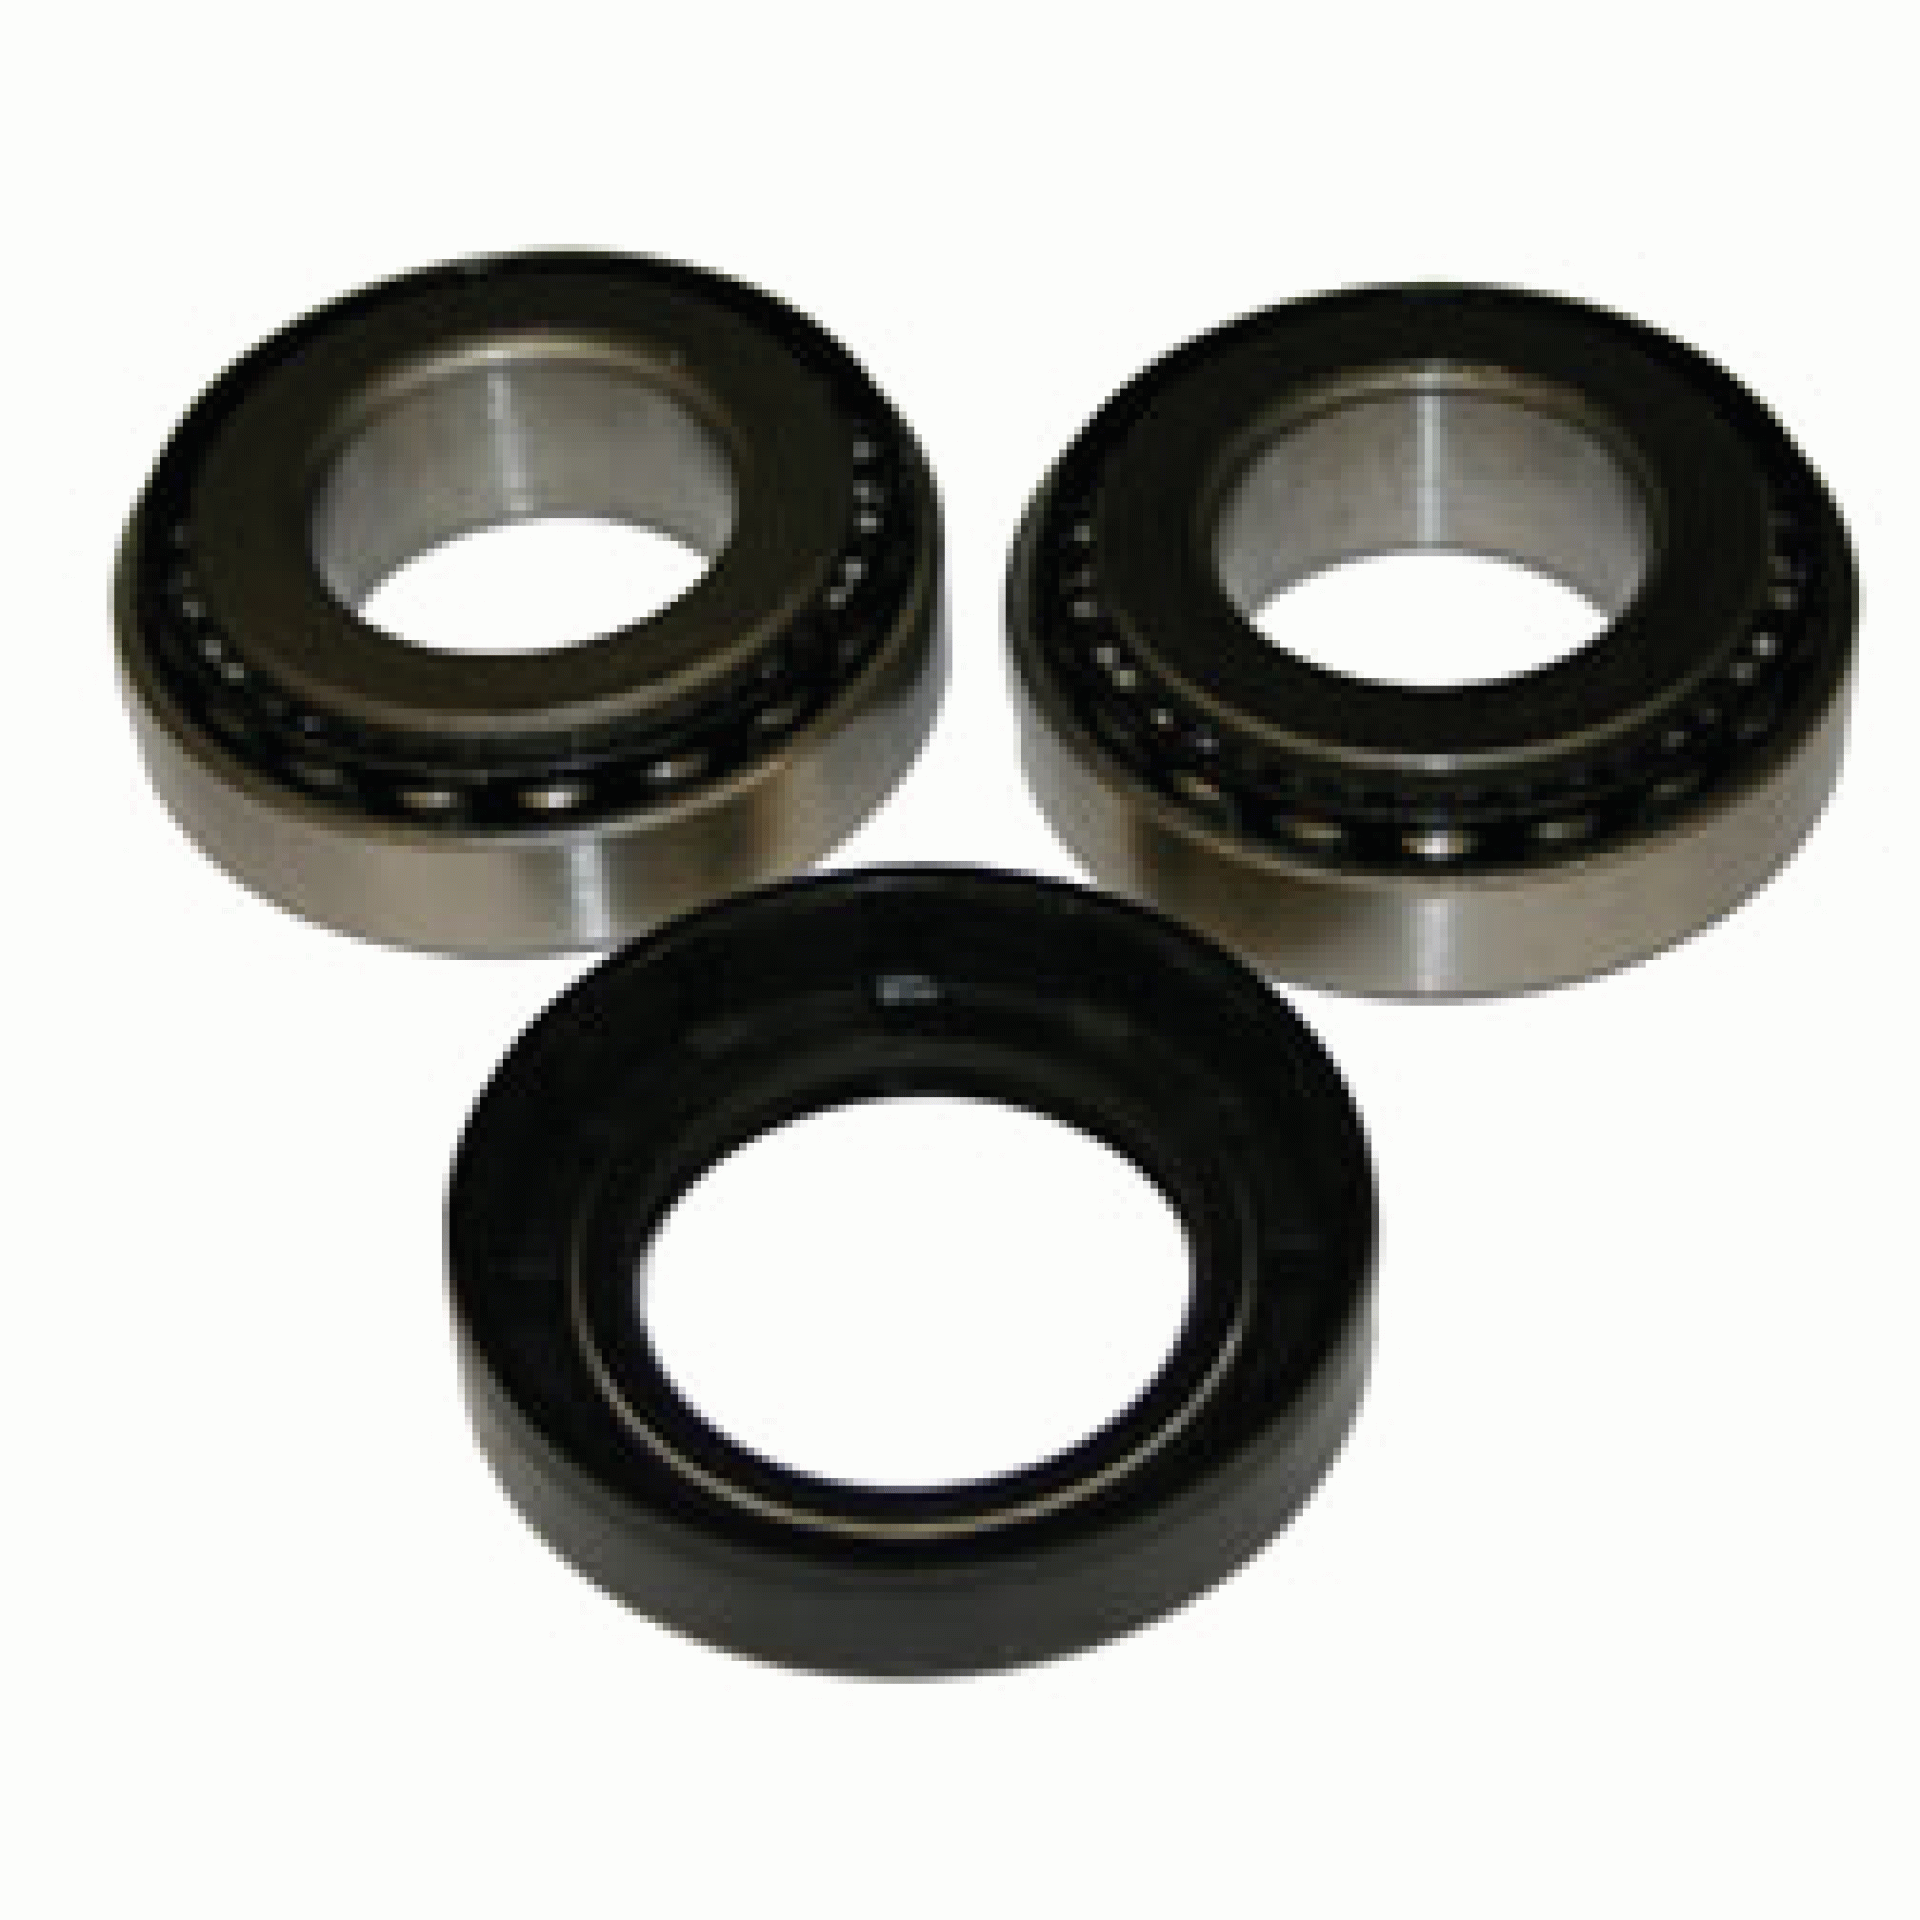 DEXTER MARINE PRODUCTS OF GEORGIA LC | K71-G02-41 | BEARING KIT- 1-3/8" X 1-1/16" TAPERED SPINDLE W/O DUST CAP L44649 & L68149 CONE L44610 & L68111 CUP